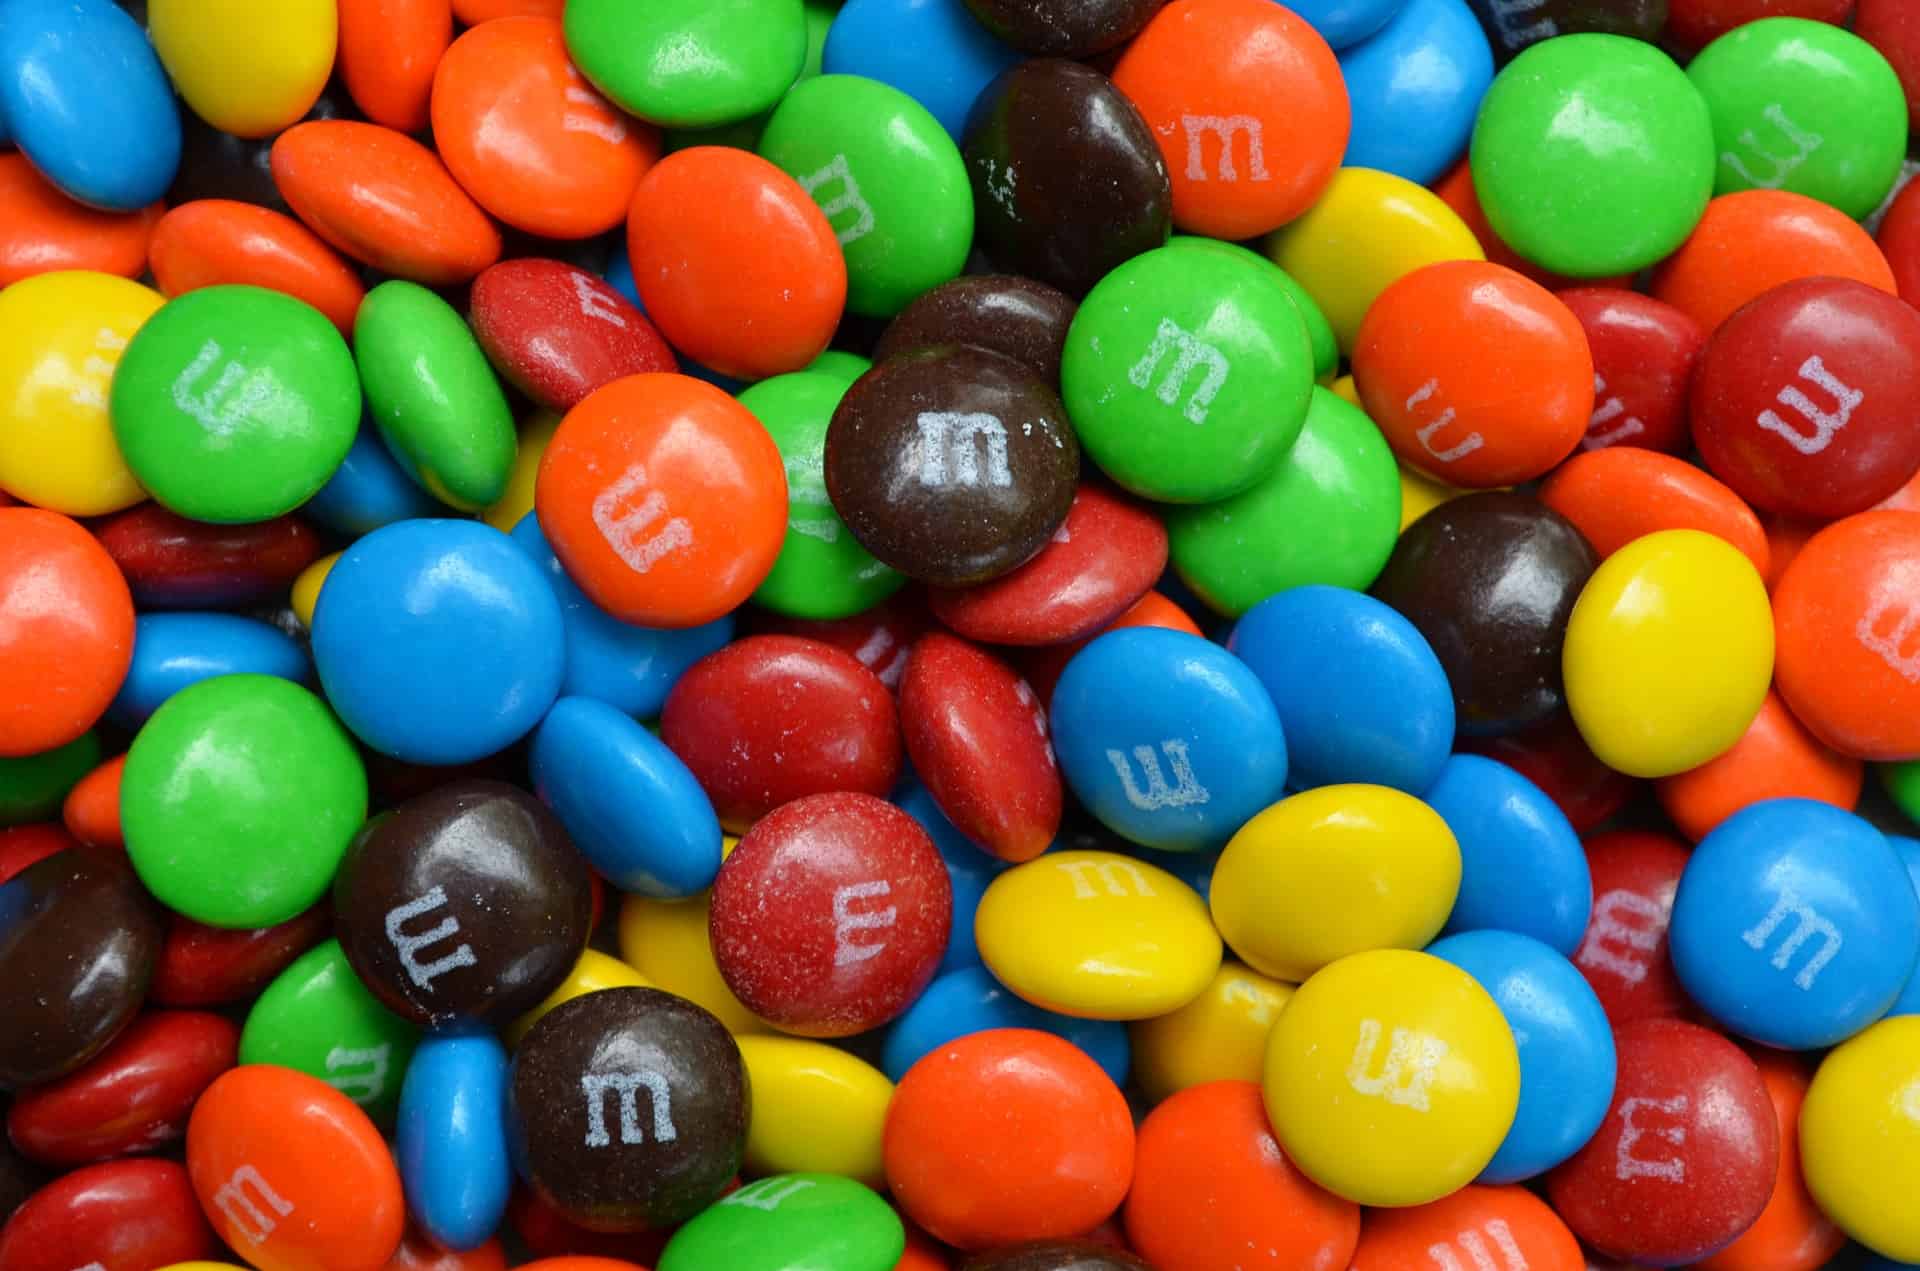 Scholarship Guide The “No Brown M&M’s” Clause: Why the Trivial Details Matter Colourful M&Ms